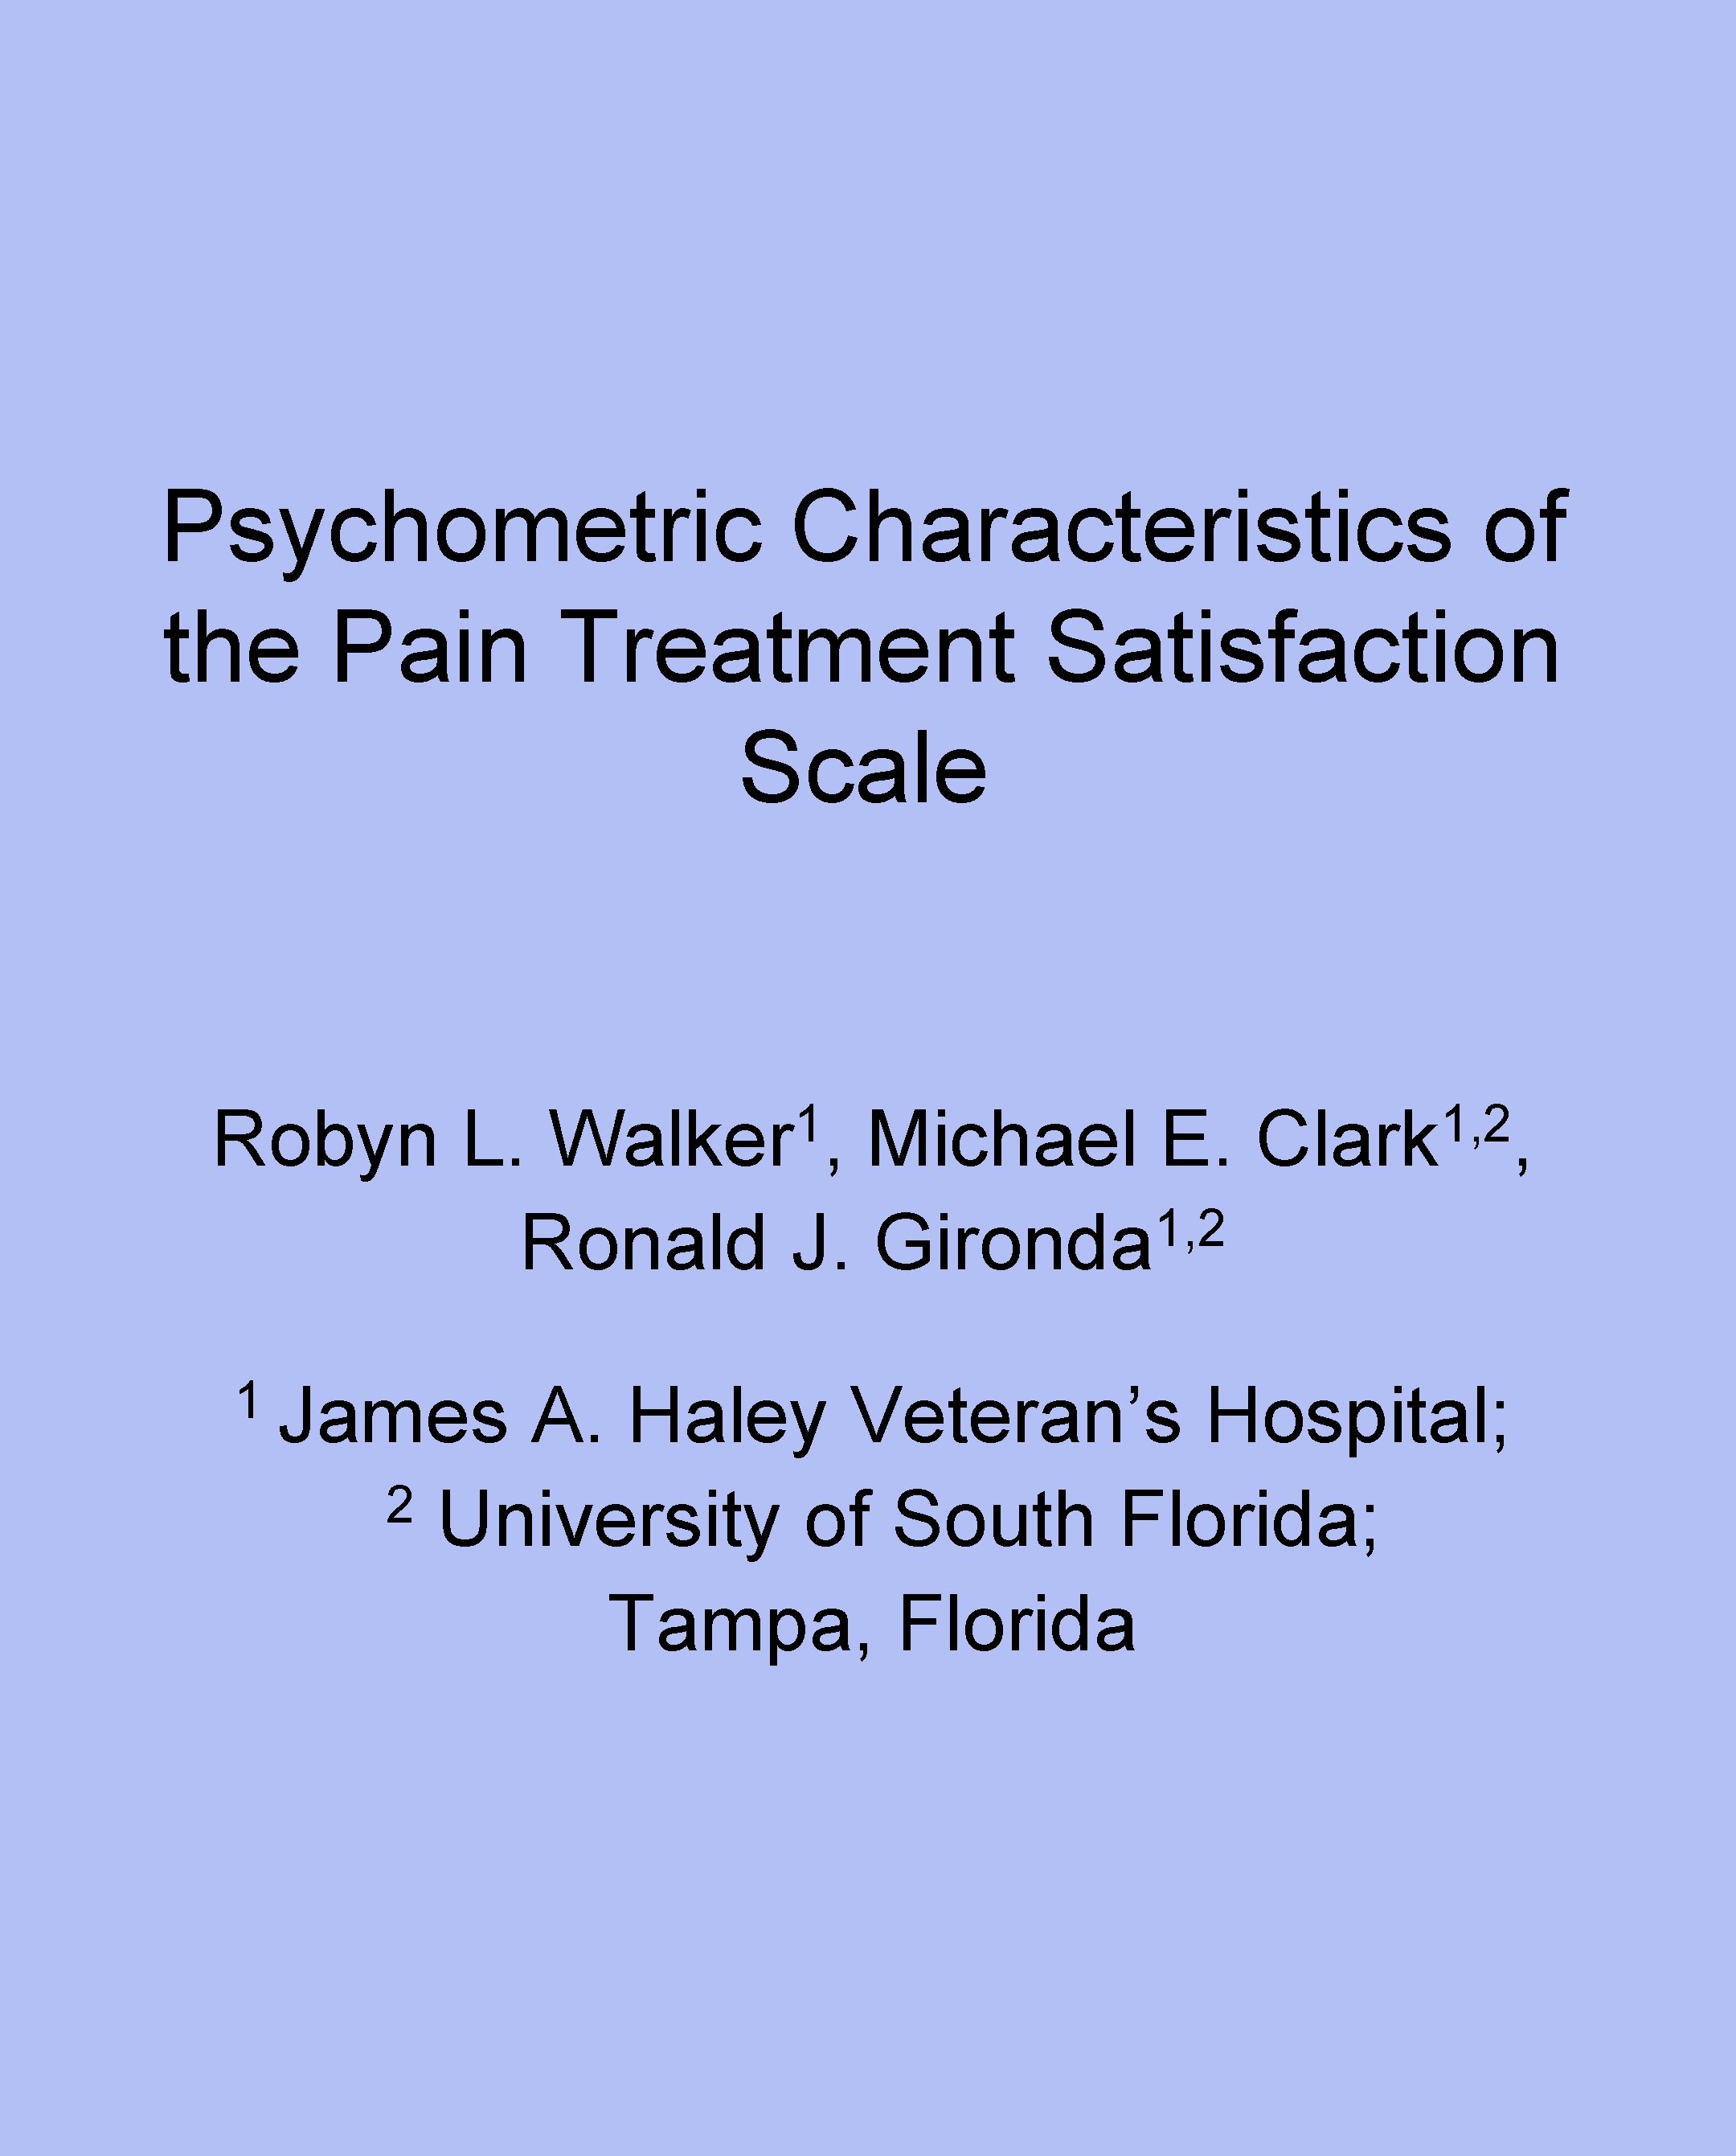 Psychometric Characteristics of the Pain Treatment Satisfaction Scale 1 Walker , Robyn L. Michael